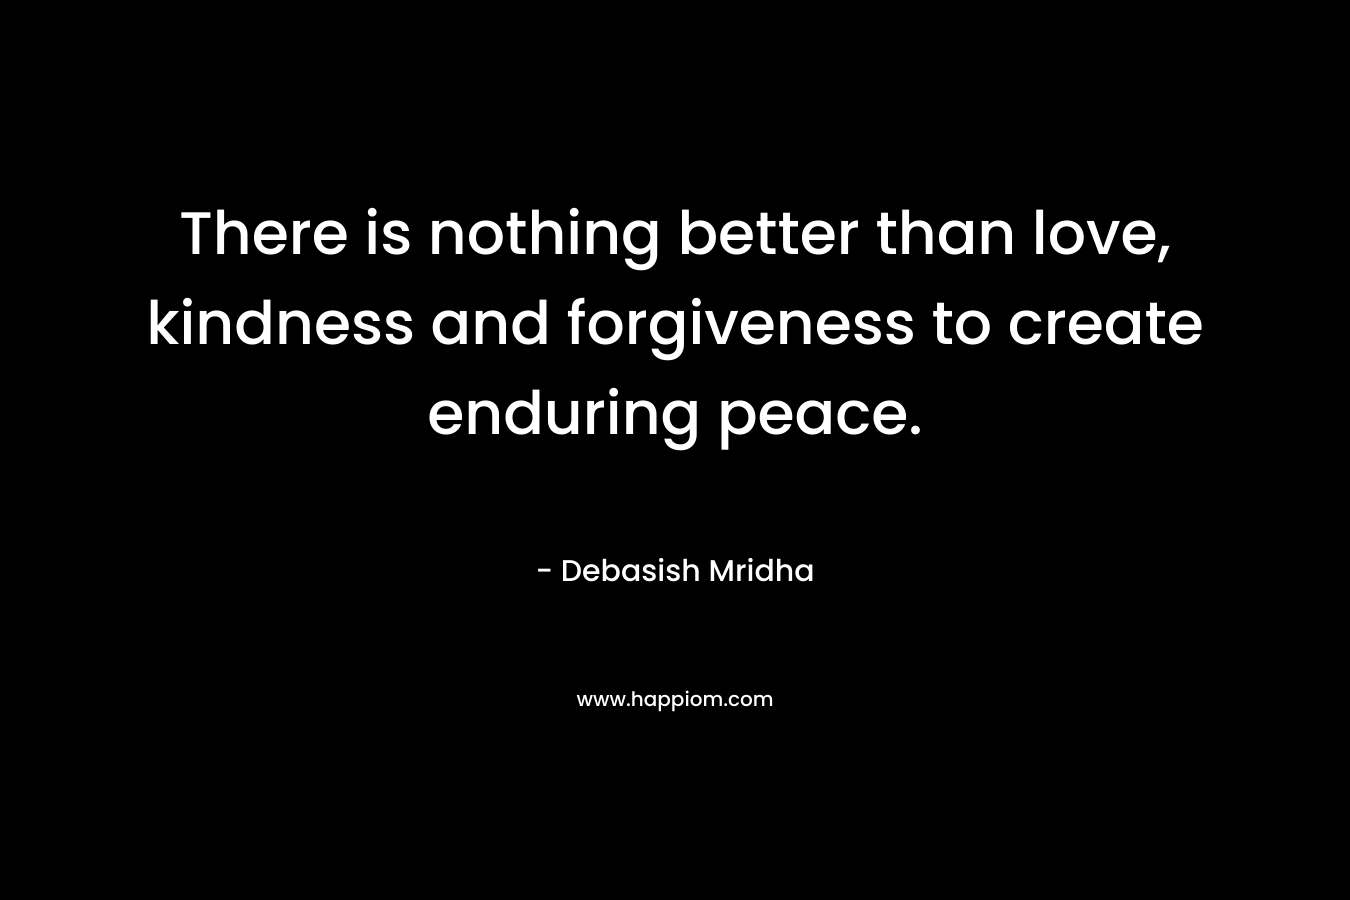 There is nothing better than love, kindness and forgiveness to create enduring peace.